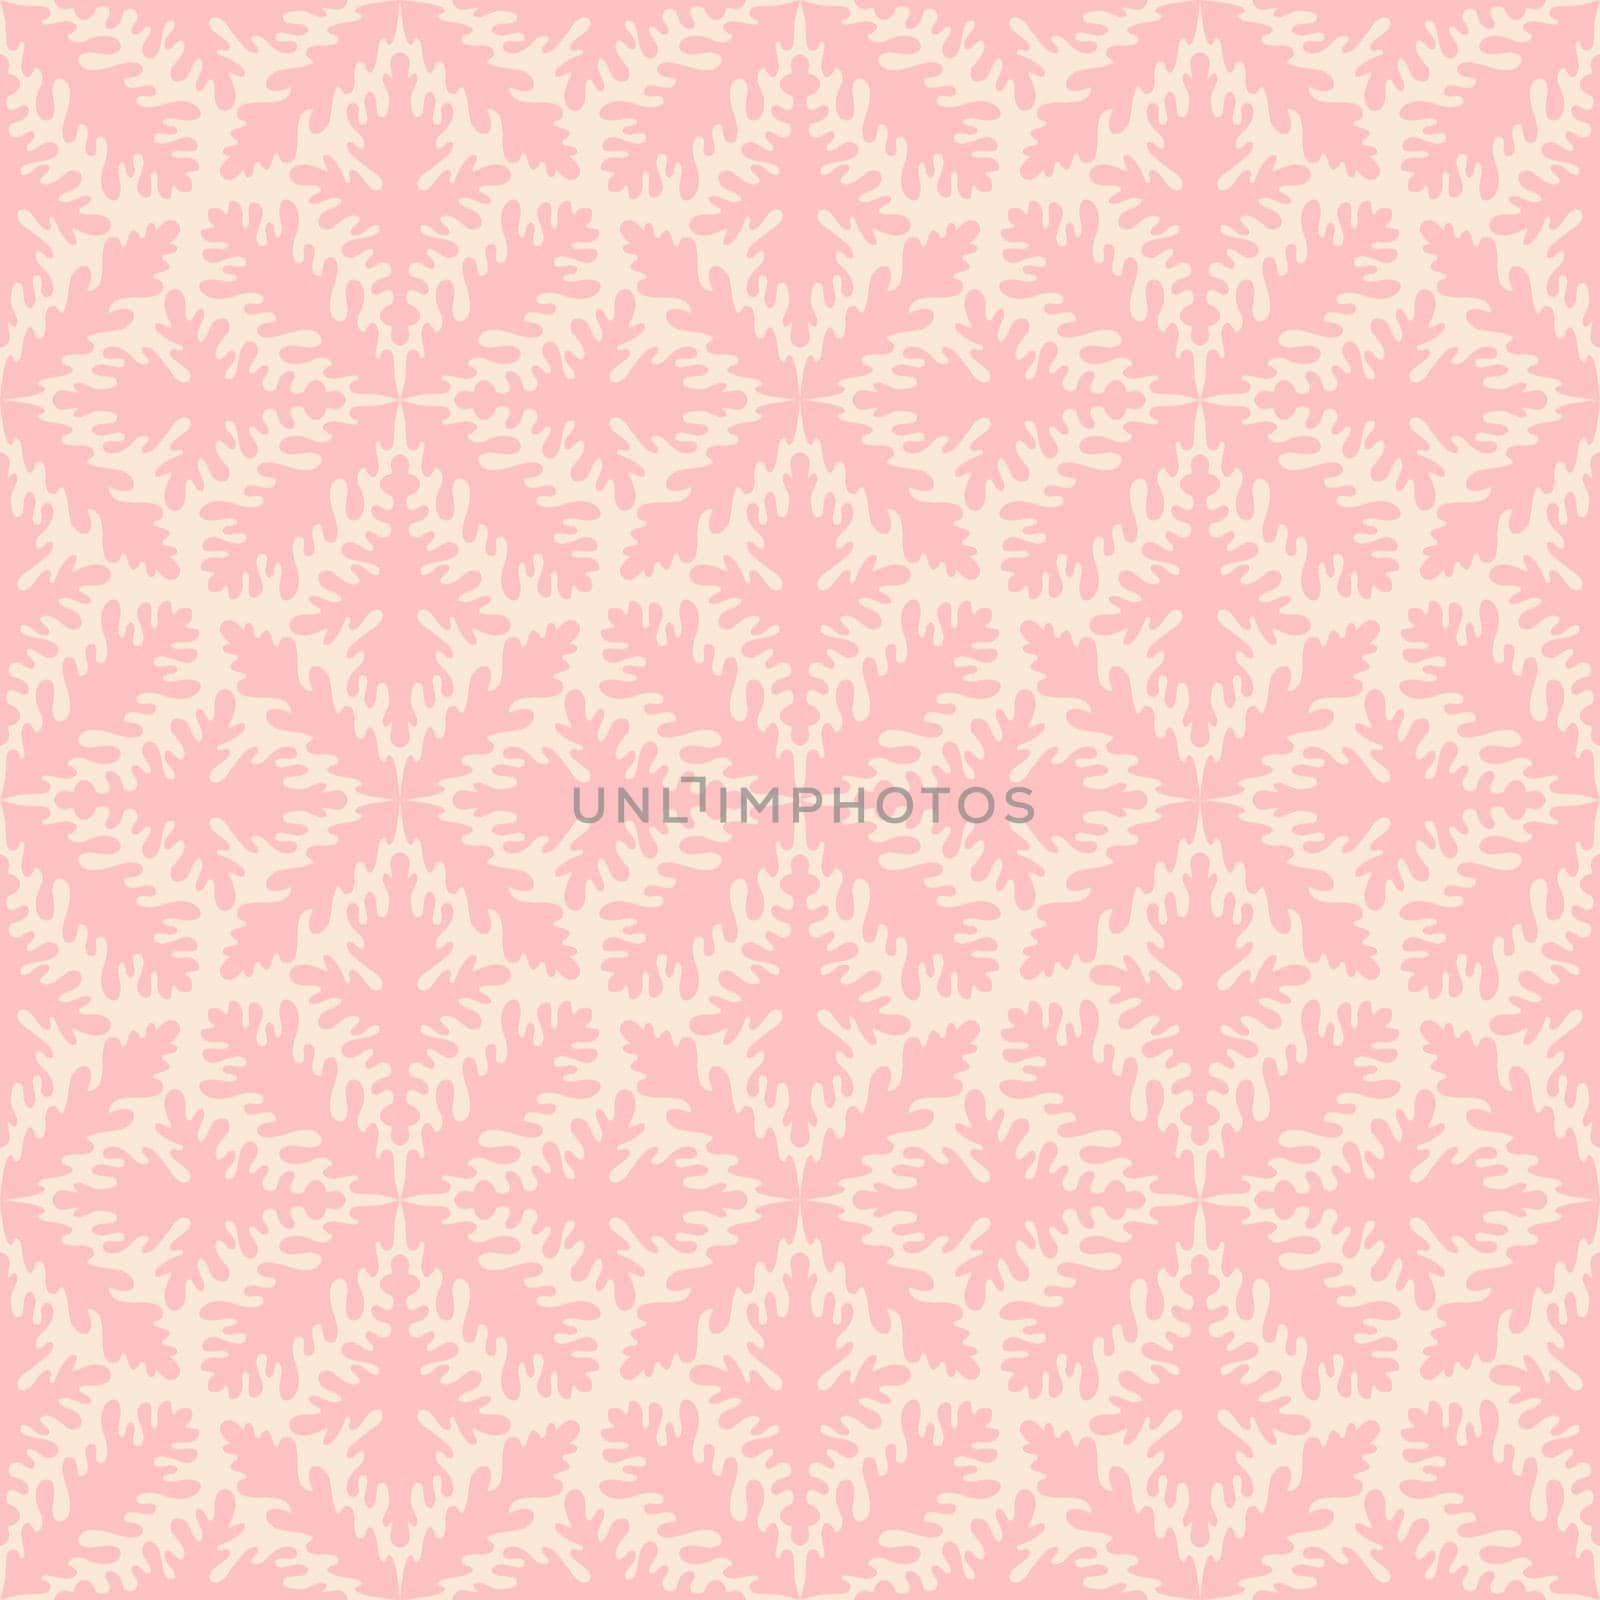 Abstract pink background with floral hand drawn element. Geometric seamless pattern for wallpaper, web page, textures, fabric, textile. Decorative vector illustration